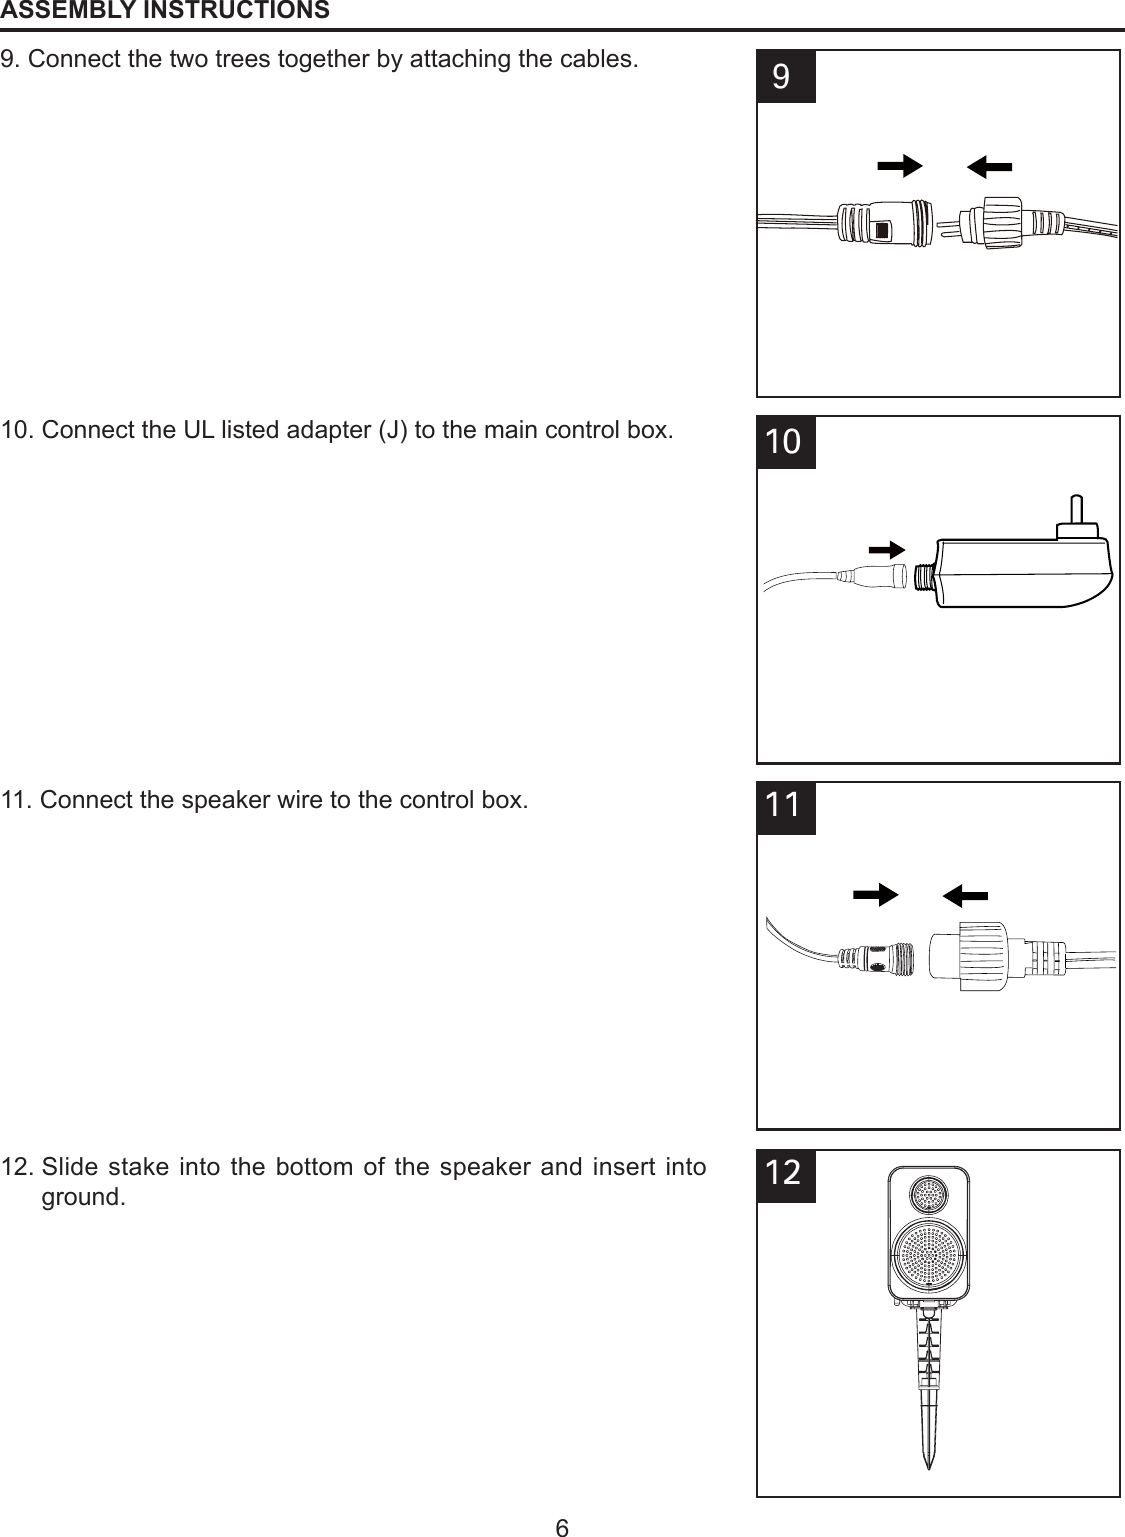 6ASSEMBLY INSTRUCTIONS899. Connect the two trees together by attaching the cables.10. Connect the UL listed adapter (J) to the main control box.81011. Connect the speaker wire to the control box.81212.  Slide stake into the bottom of the speaker and insert into ground.811